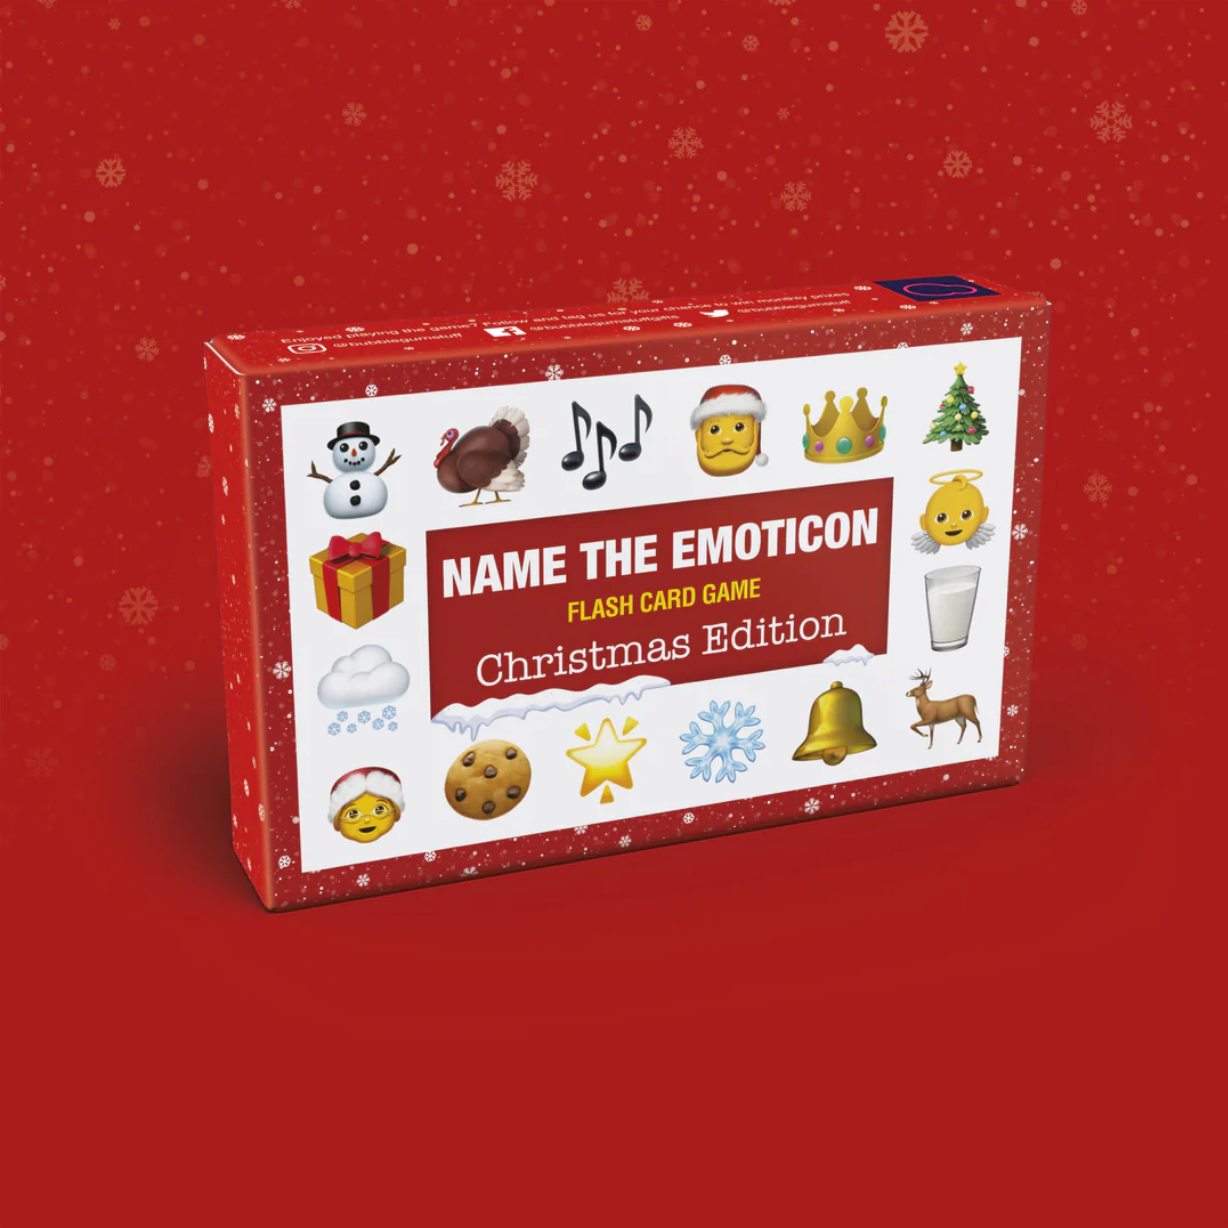 Name the Emoticon Flash Card Game: Christmas Edition